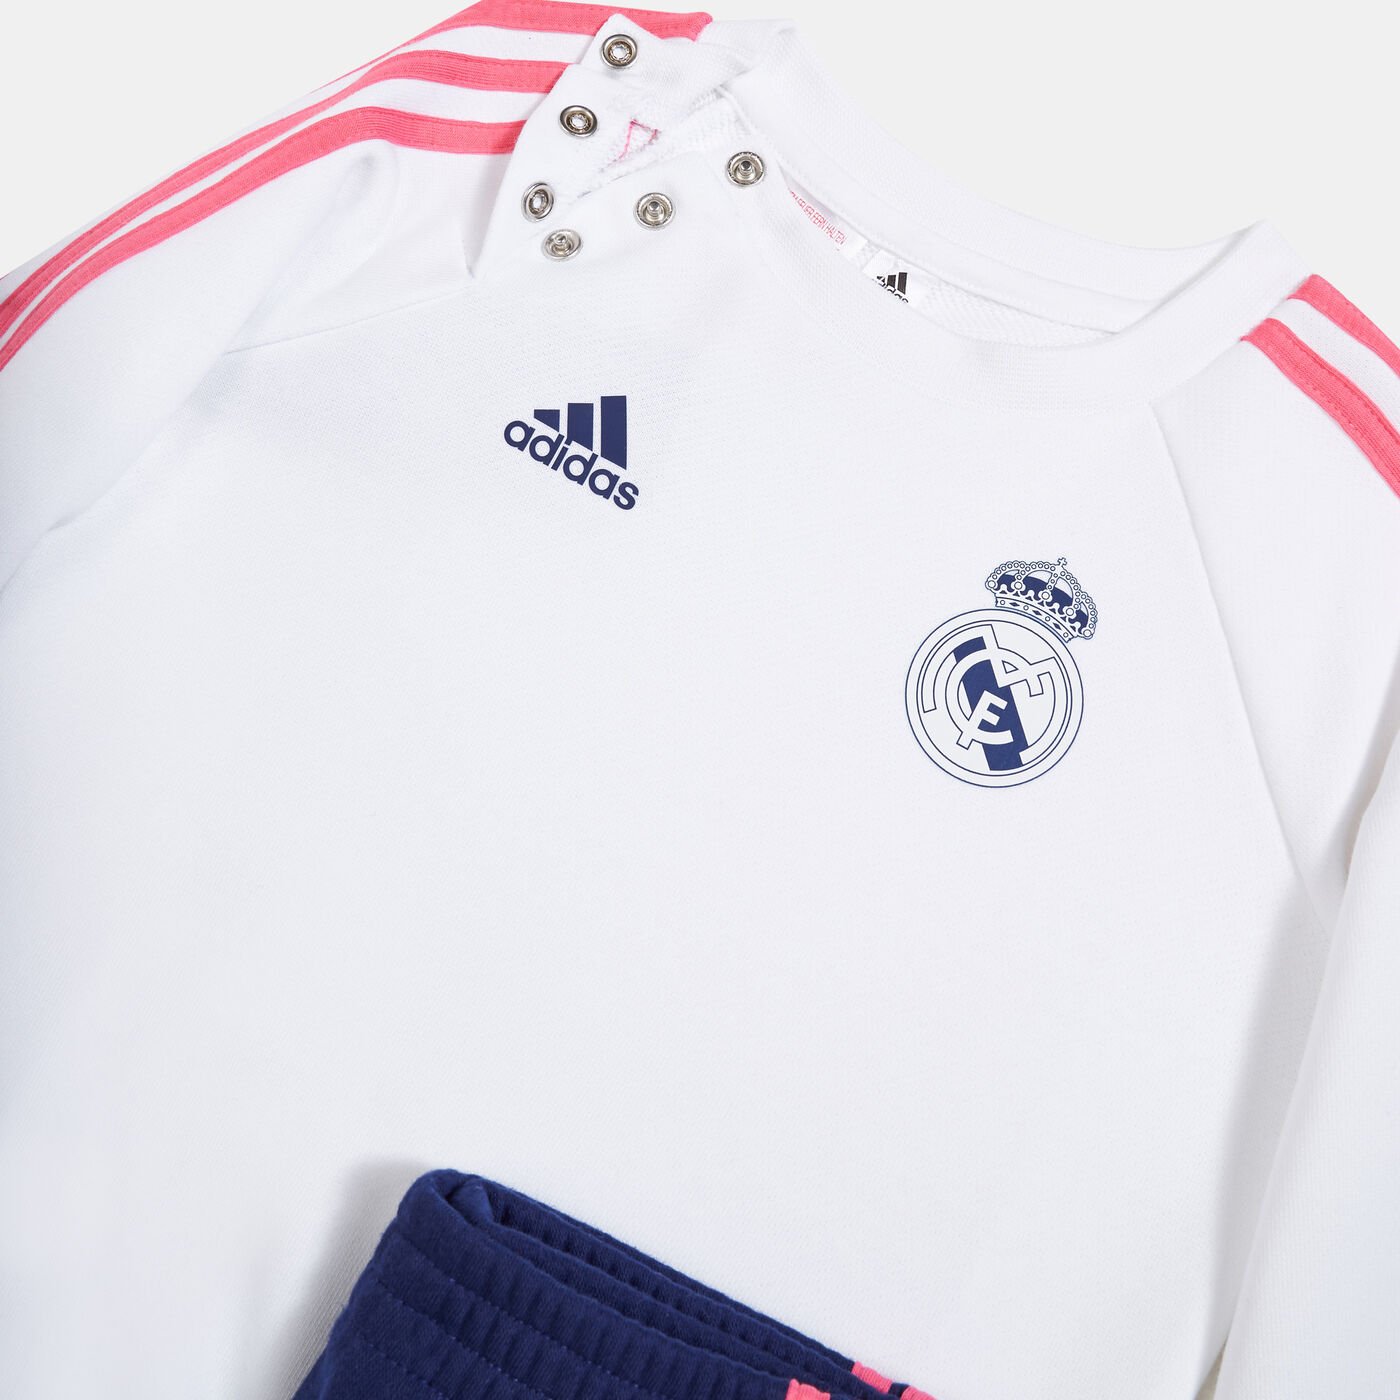 Kids' Real Madrid Tracksuit (Baby and Toddler)